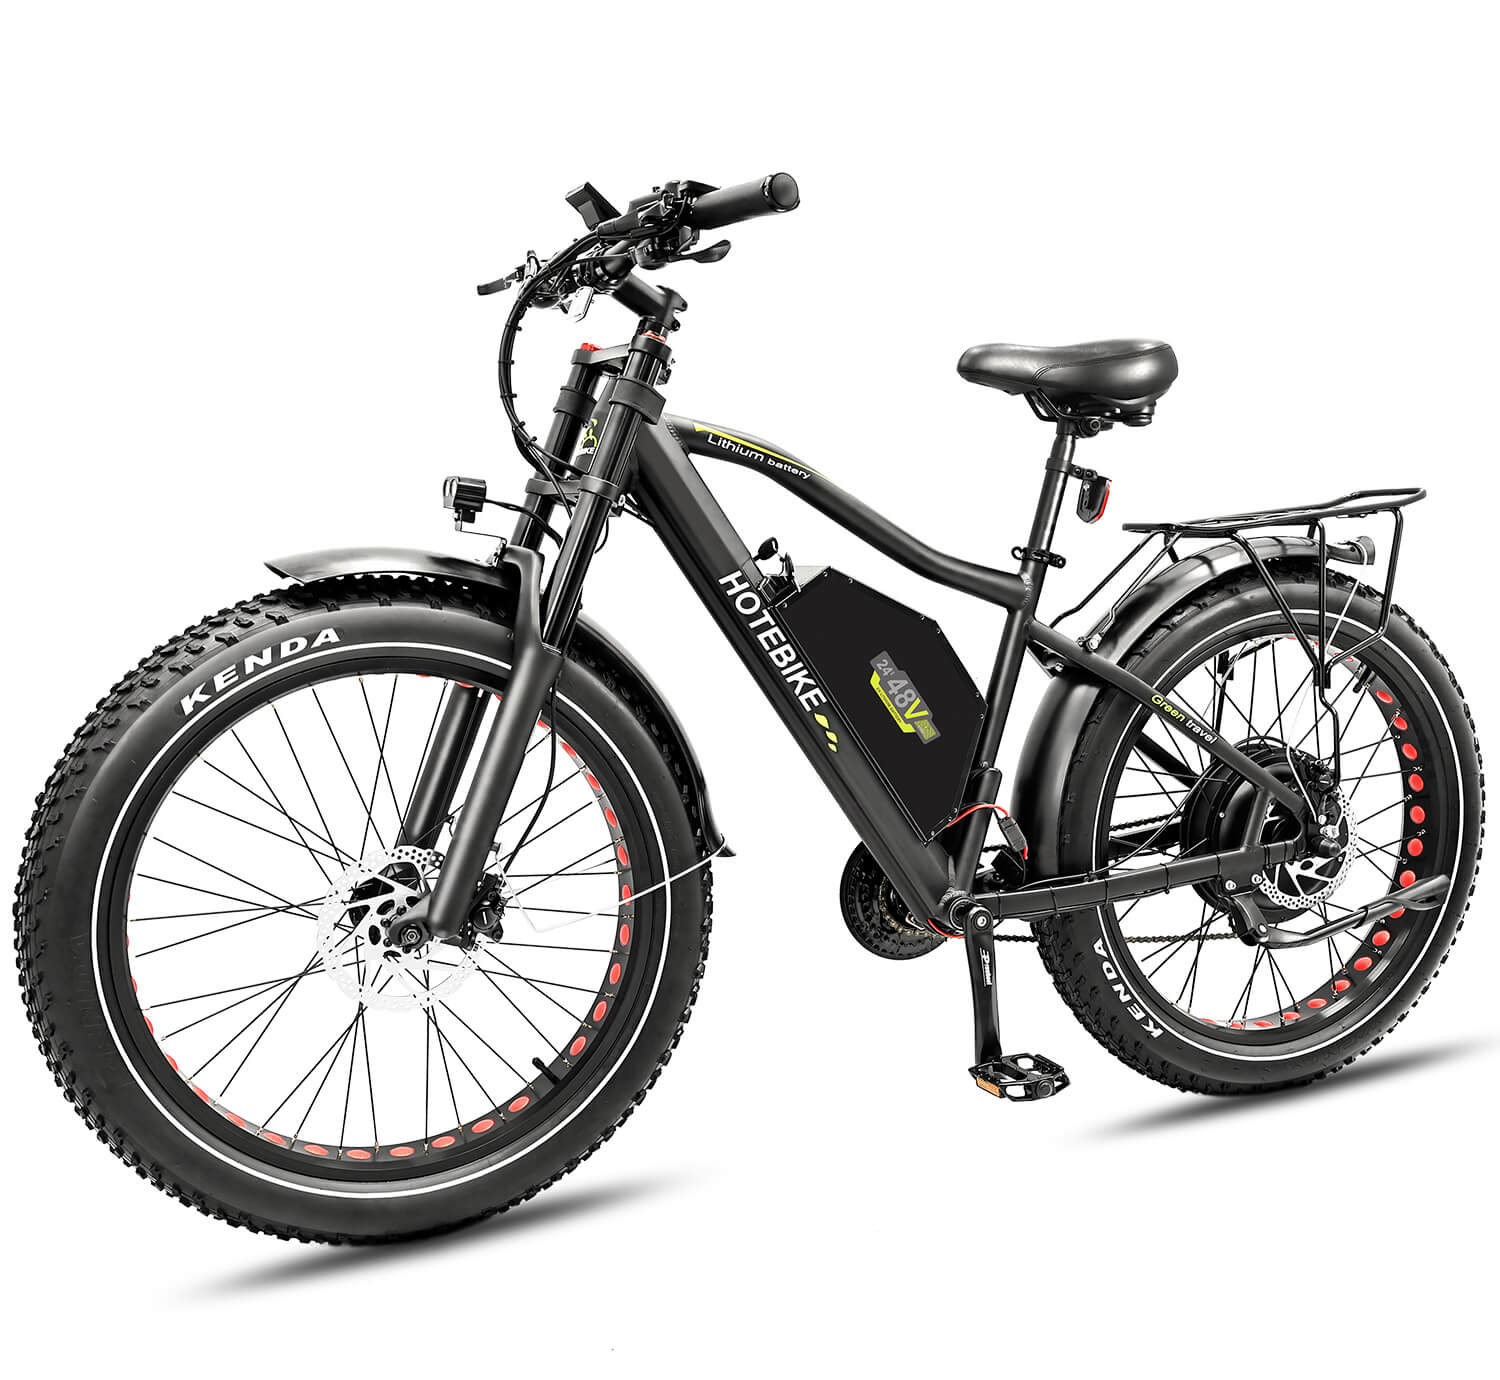 26″ 1000W Fat Tire Ebike for Adults